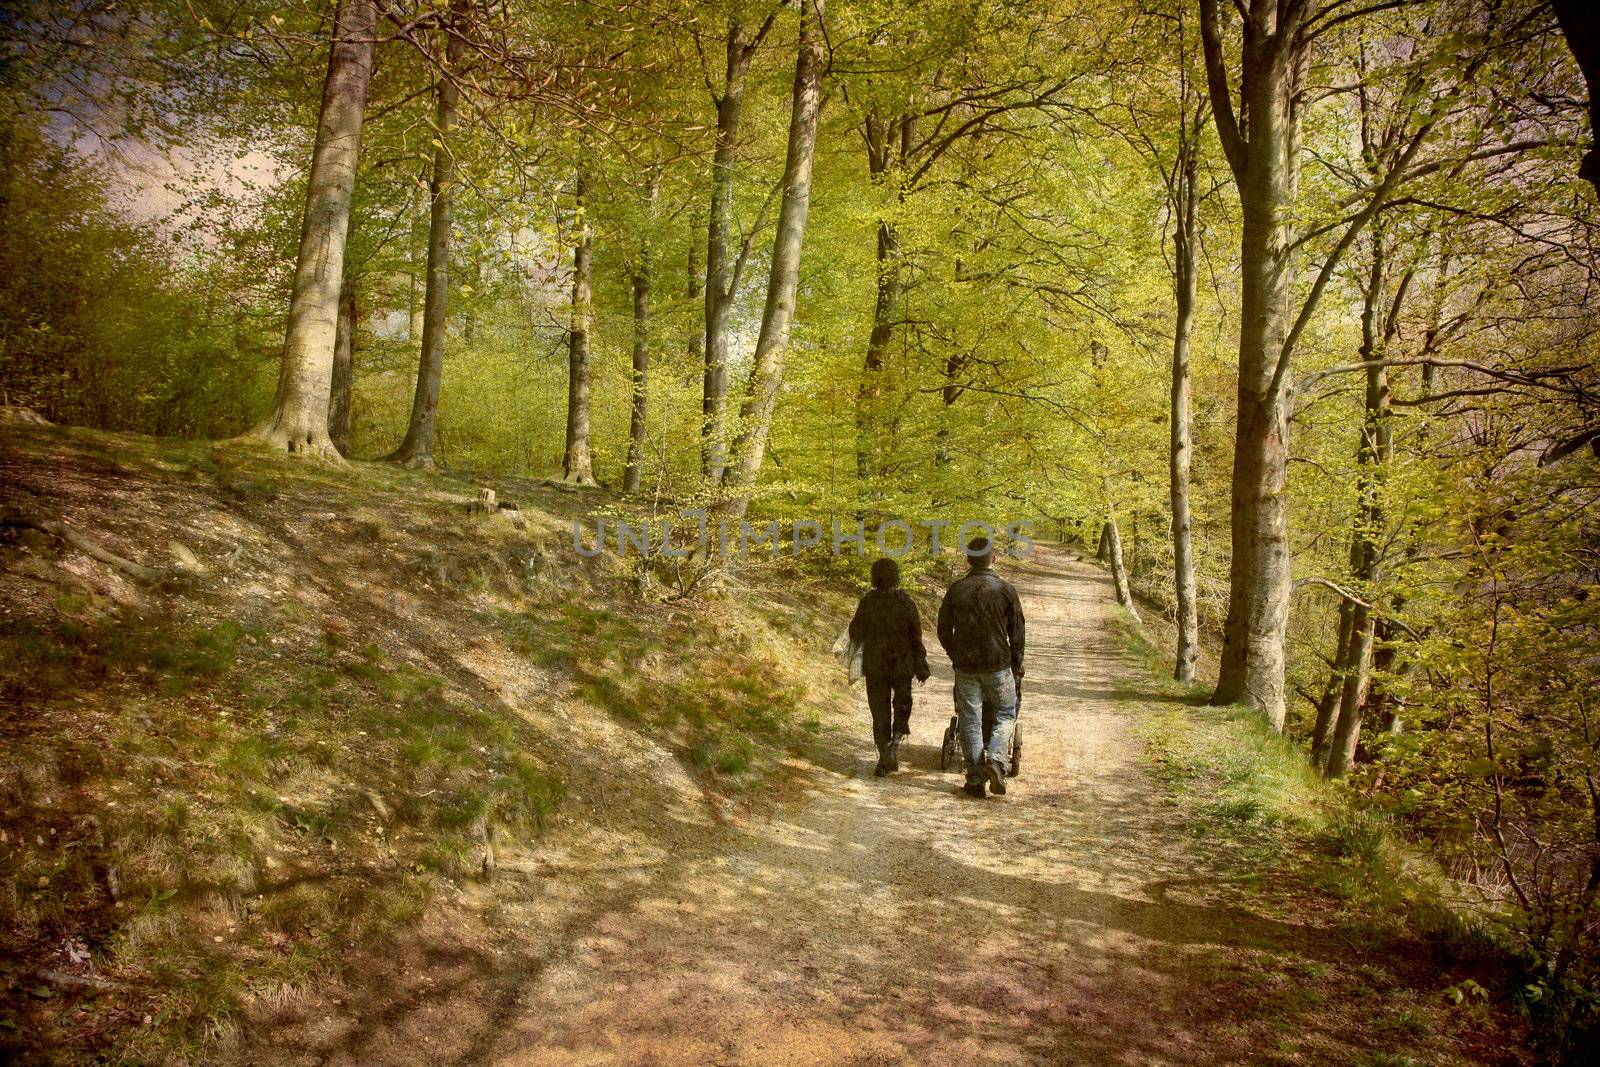 Artistic work of my own in retro style - Postcard from Denmark. - Family walk in the spring Beech forest. More of my images worked together to reflect age and time.